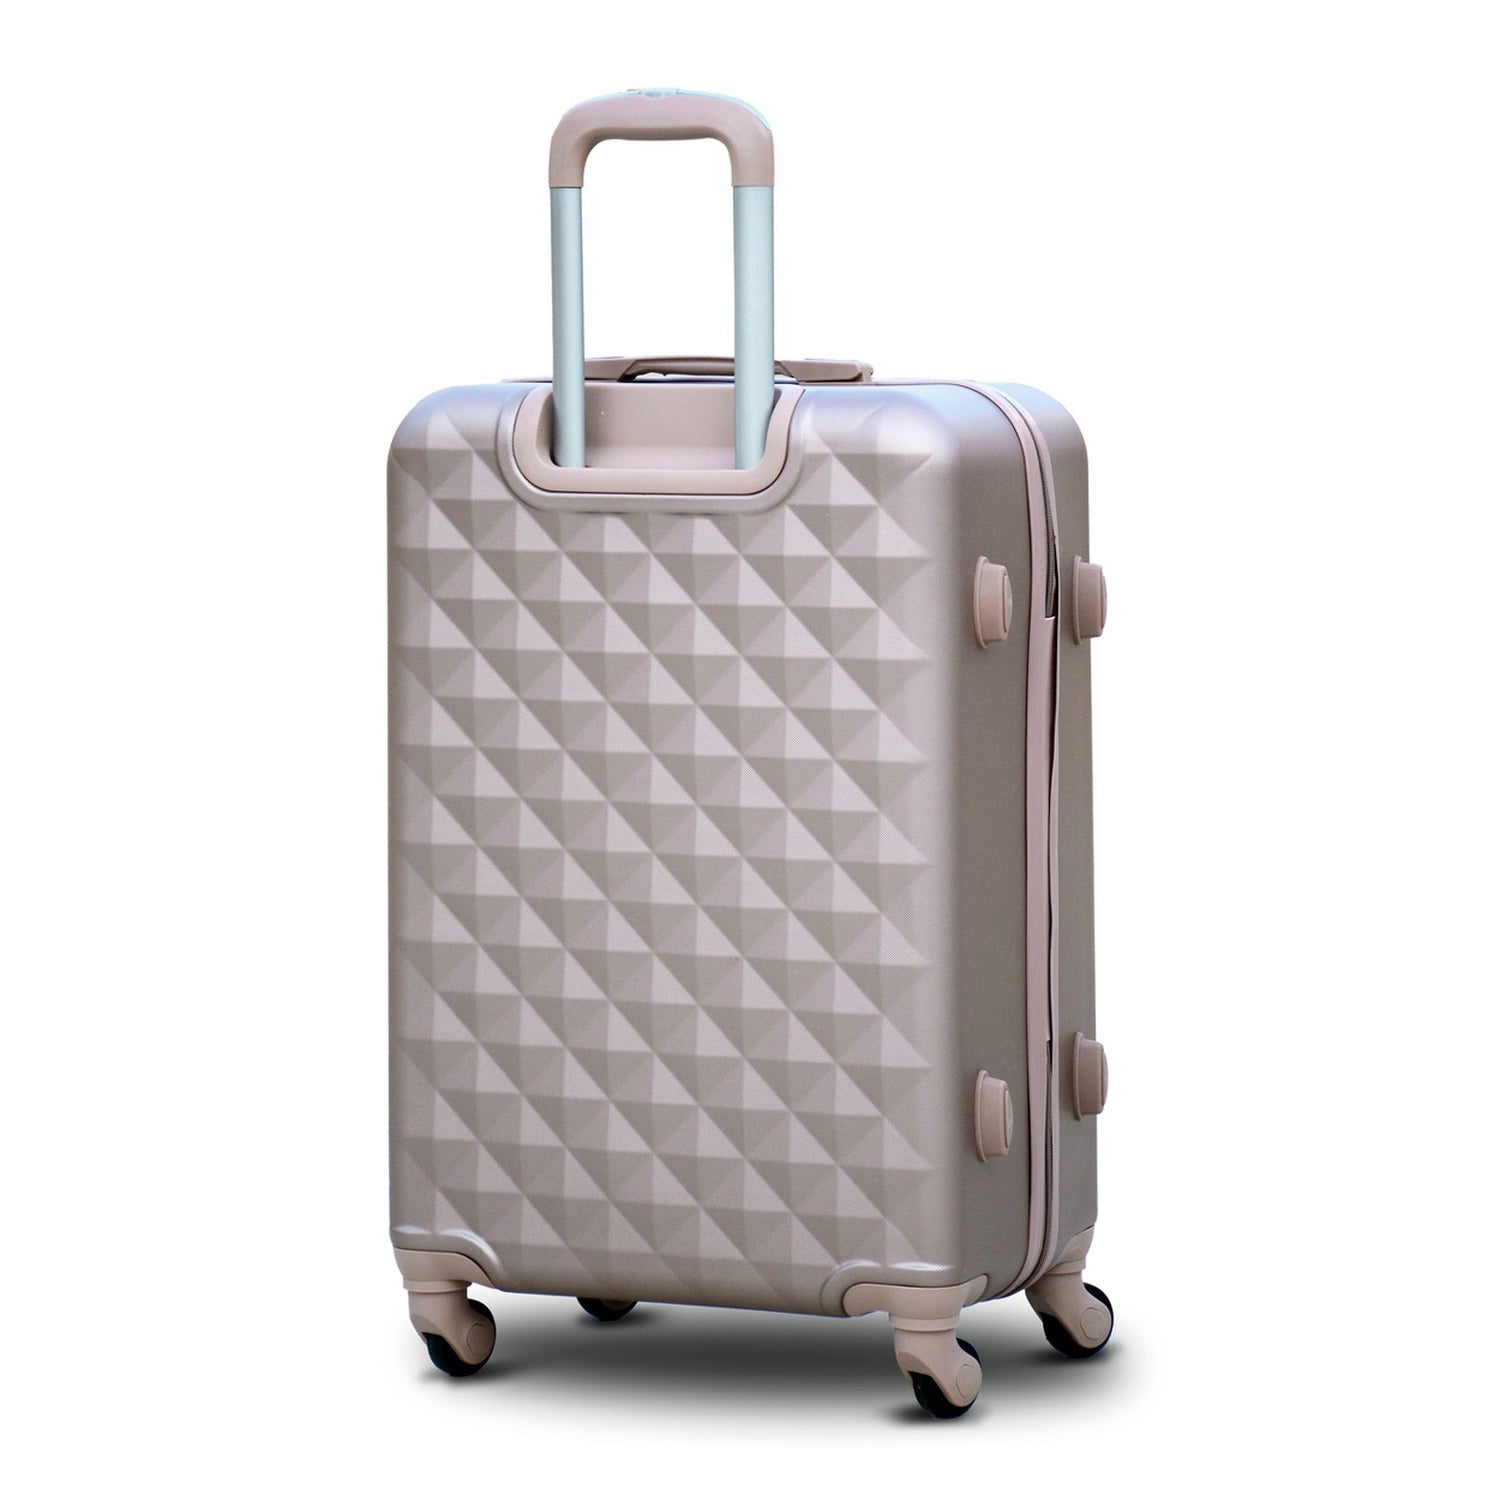 4 Piece Full Set 7" 20" 24" 28 Inches Gold Colour Diamond Cut ABS Lightweight Luggage Bag With Spinner Wheel Zaappy.com